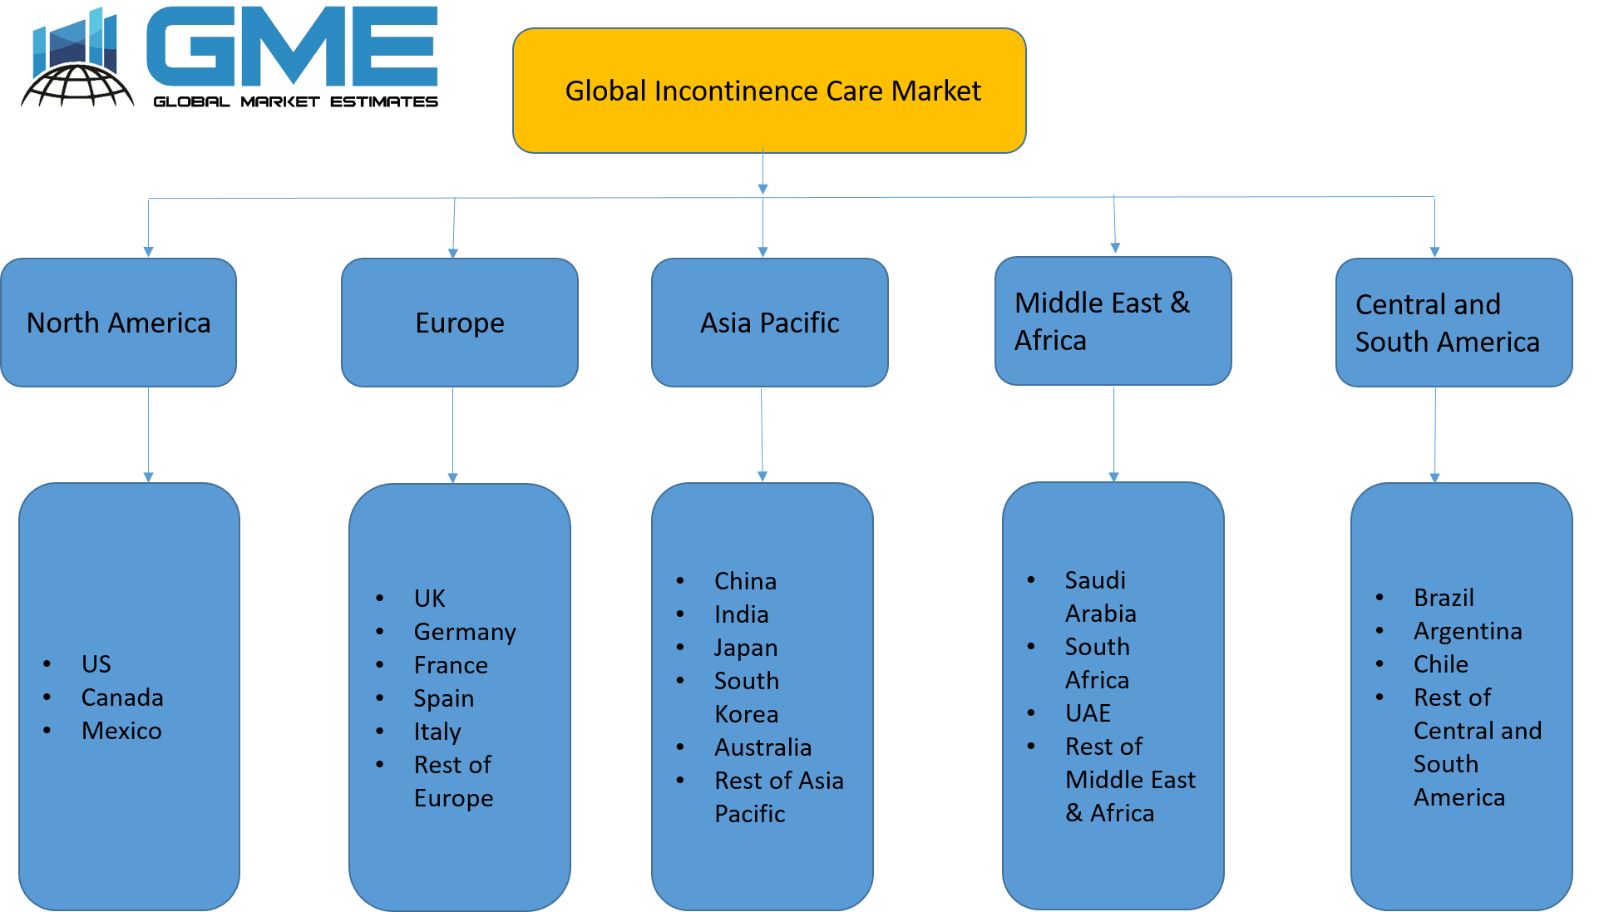 Global Incontinence Care Market - Regional Analysis